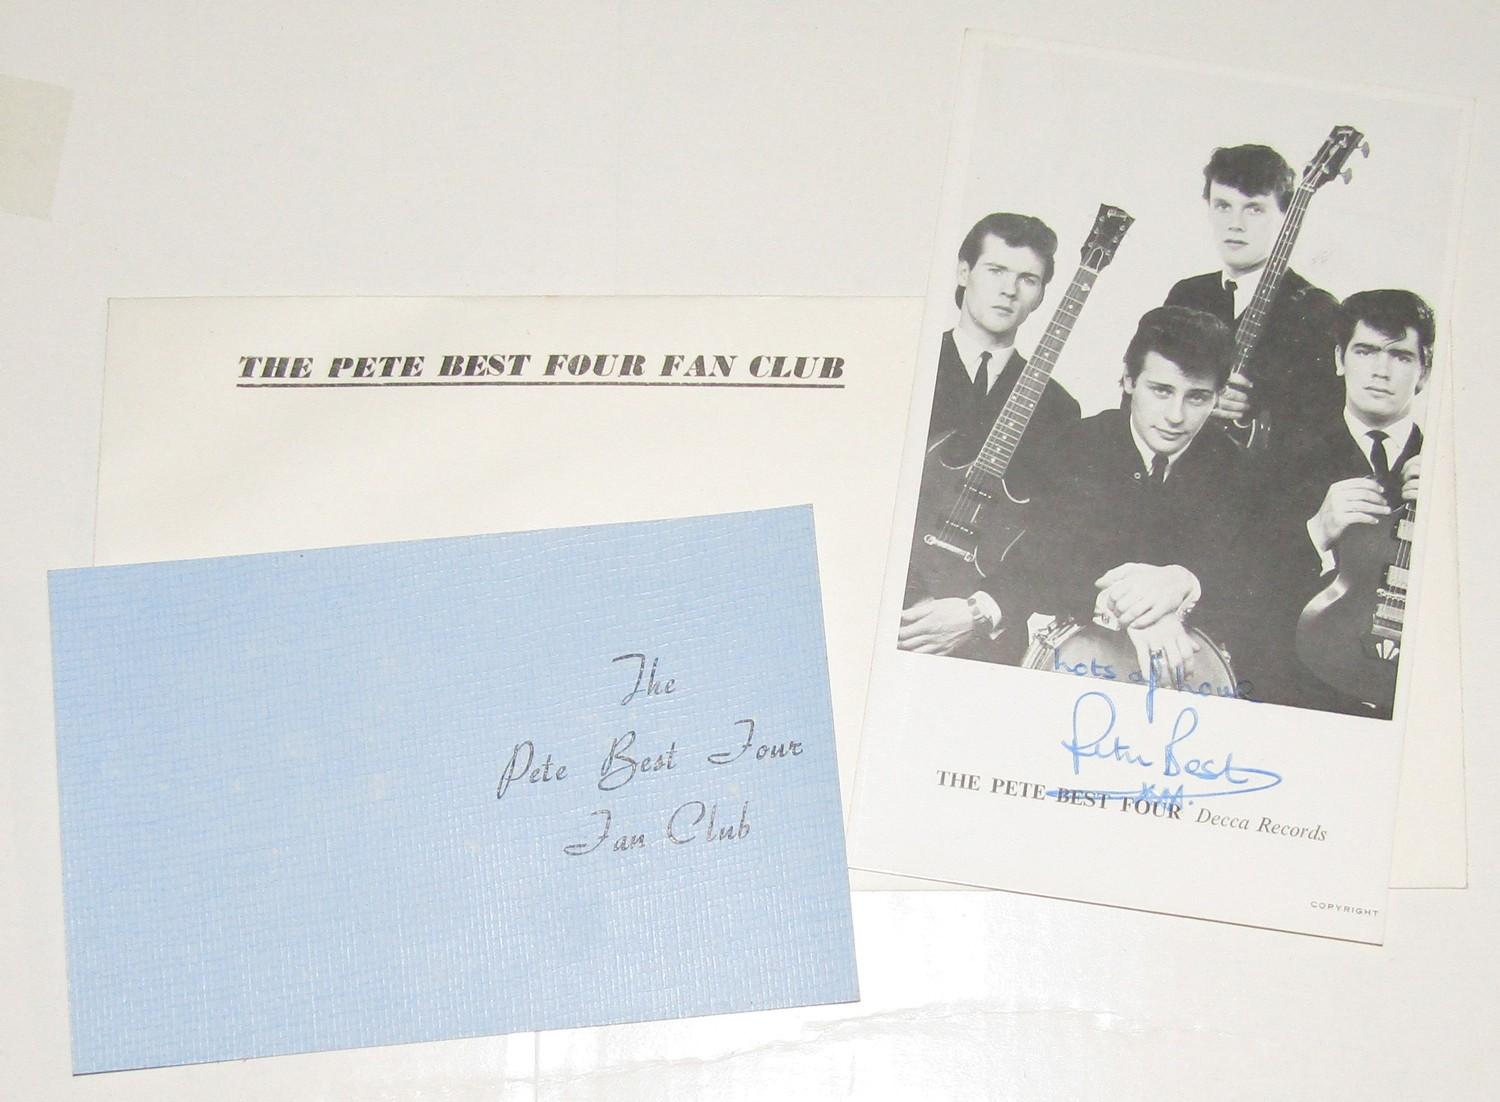 The Pete Best Four Why Did I Fall In Love With You Demo Single and The Pete Best Four Fan Club Items - Image 2 of 2